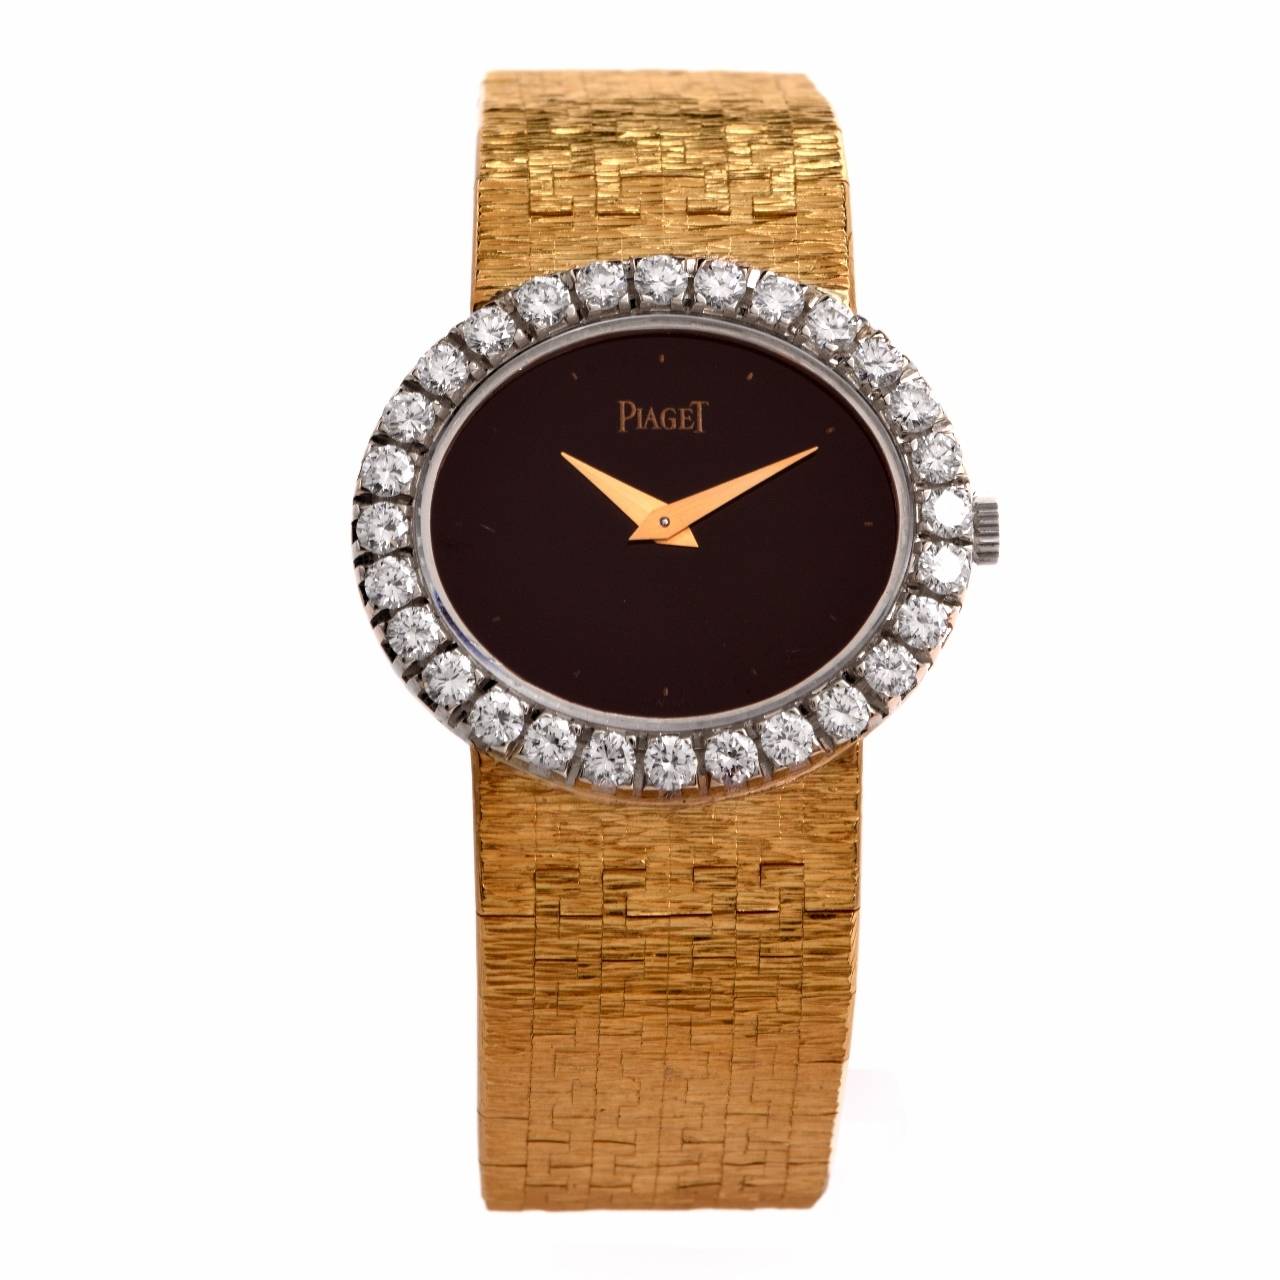 This authentic  all original ladies' vintage ca 1960's Piaget wristwatch of unsurpassed refinement and aesthetic beauty is crafted in solid artfully textured and matted 18K yellow gold and features an oval yellow gold case enriched with a sparkling